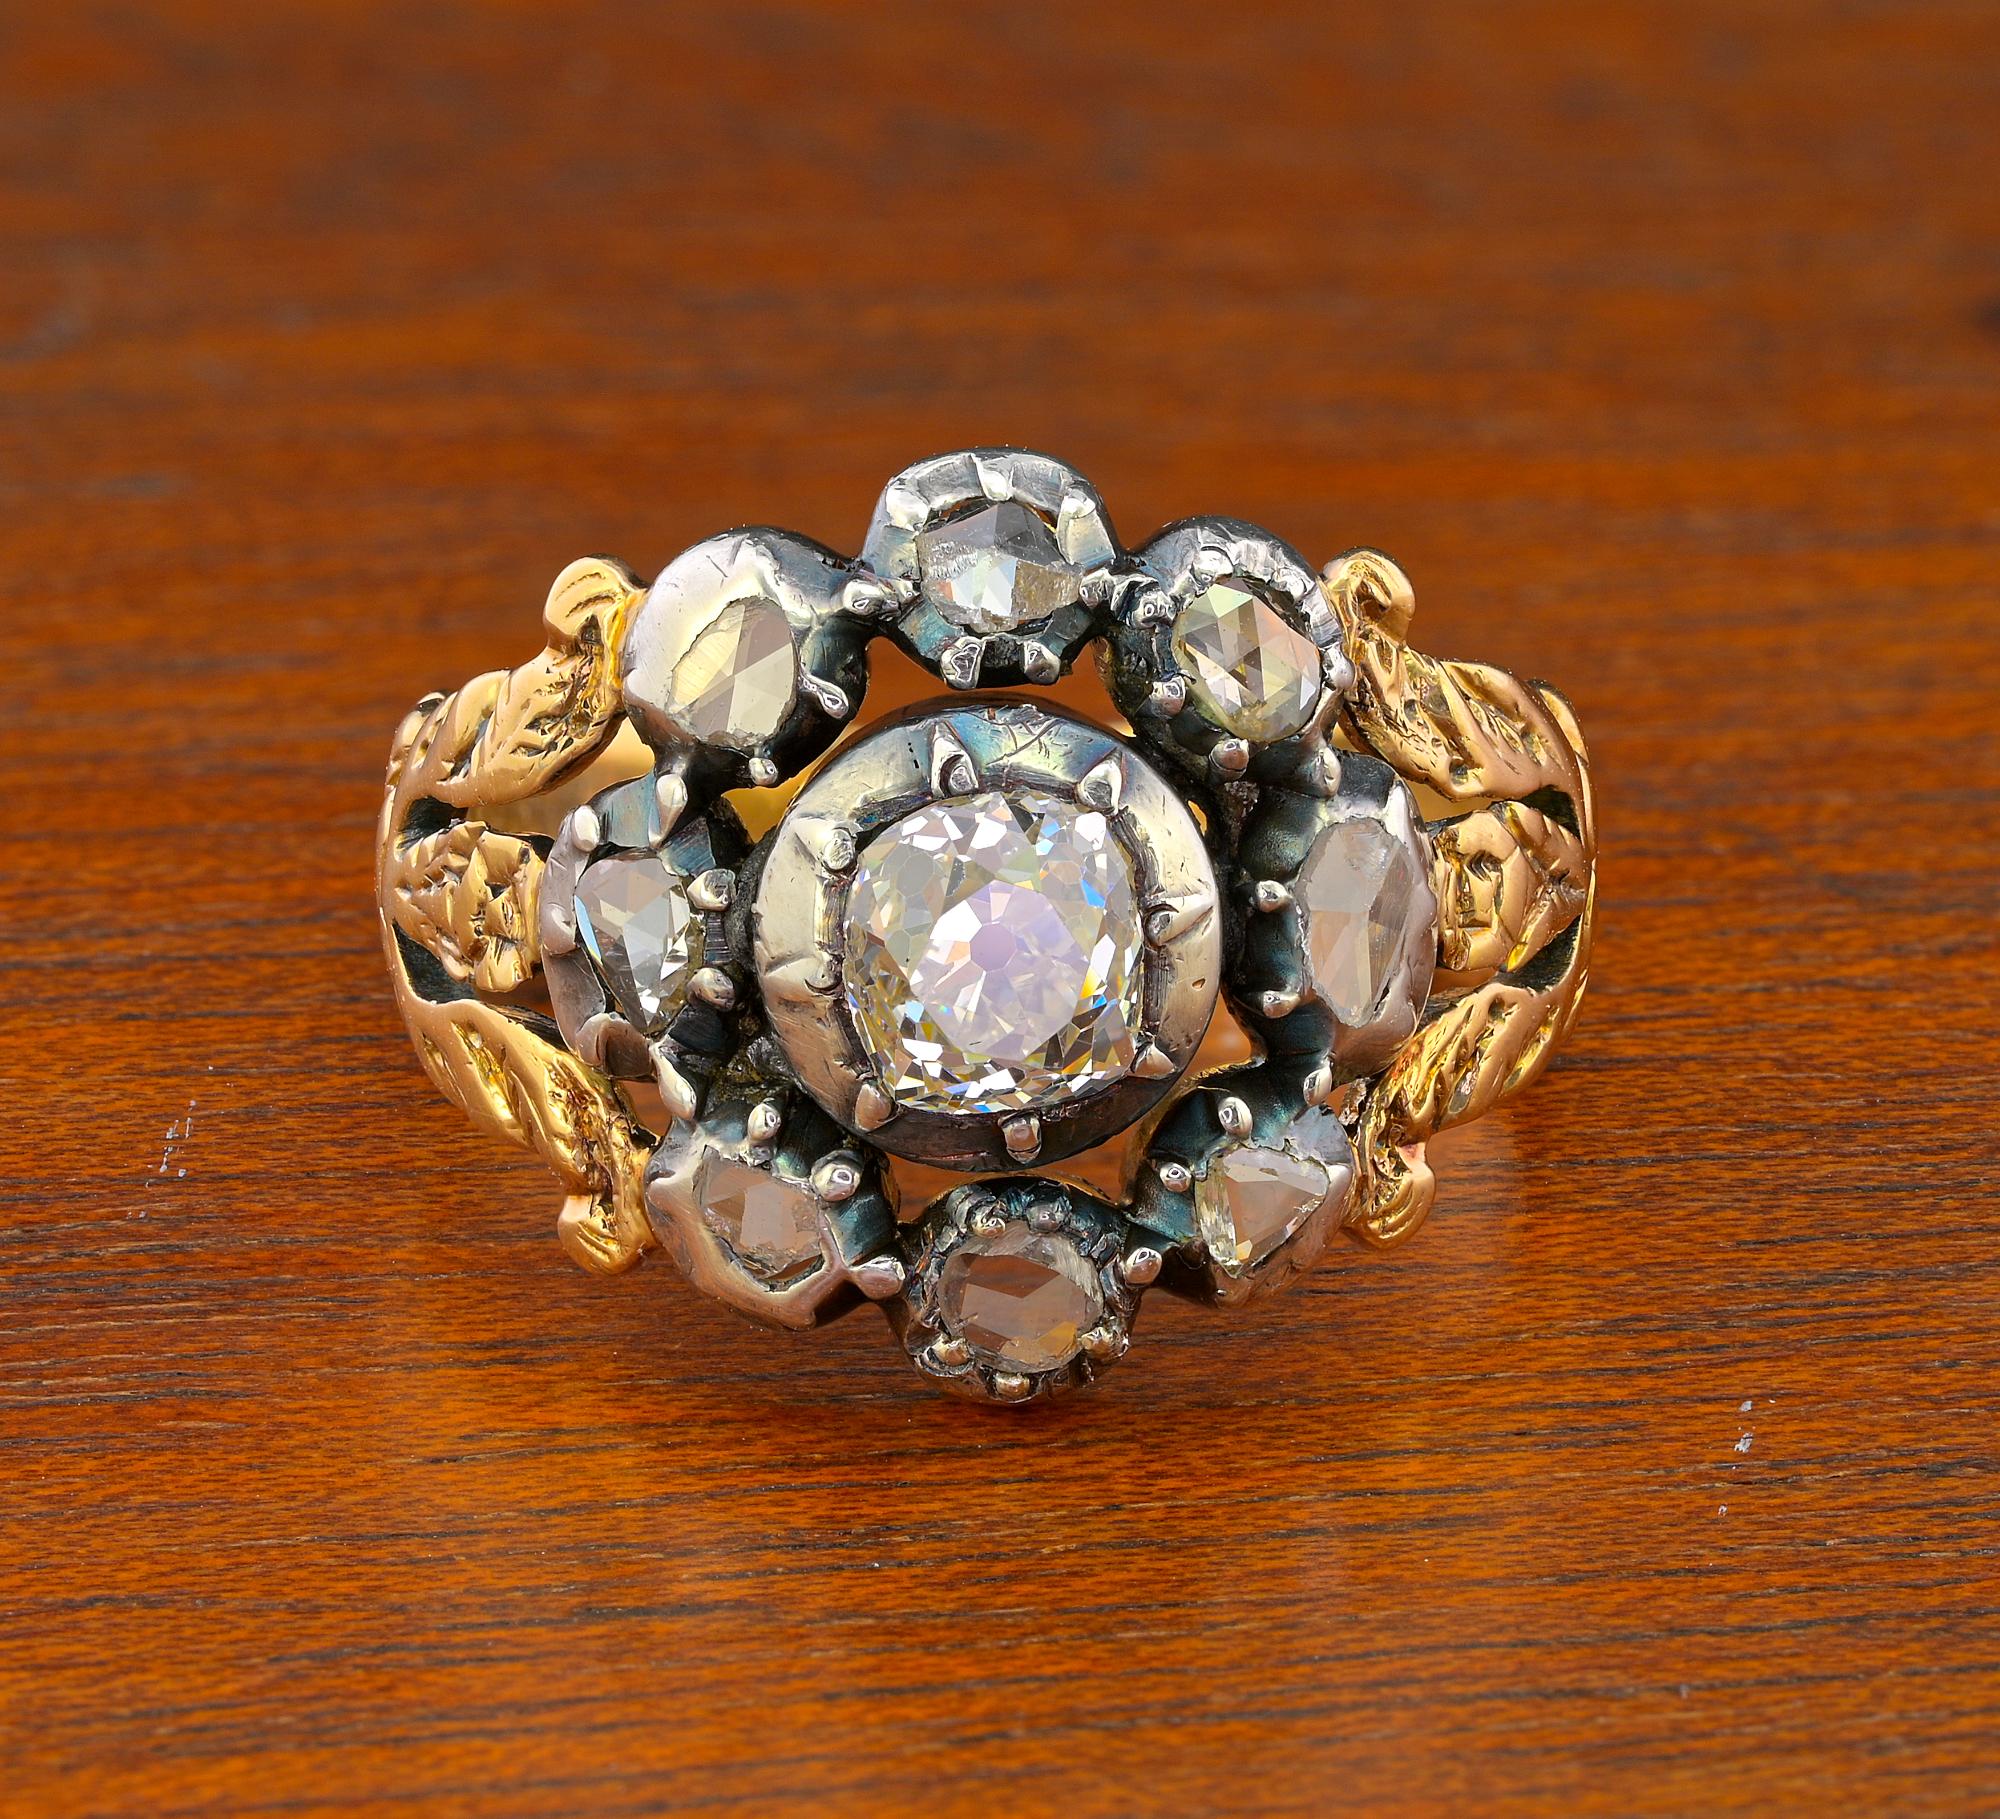 Journey to Georgian Times
Magnificent and rare example of Georgian / Regency period Diamond cluster ring, 1800 ca
Skillfully hand crafted of solid 18 Kt gold and silver portion in the glorious workmanship of that time
The ring sits very flat on the